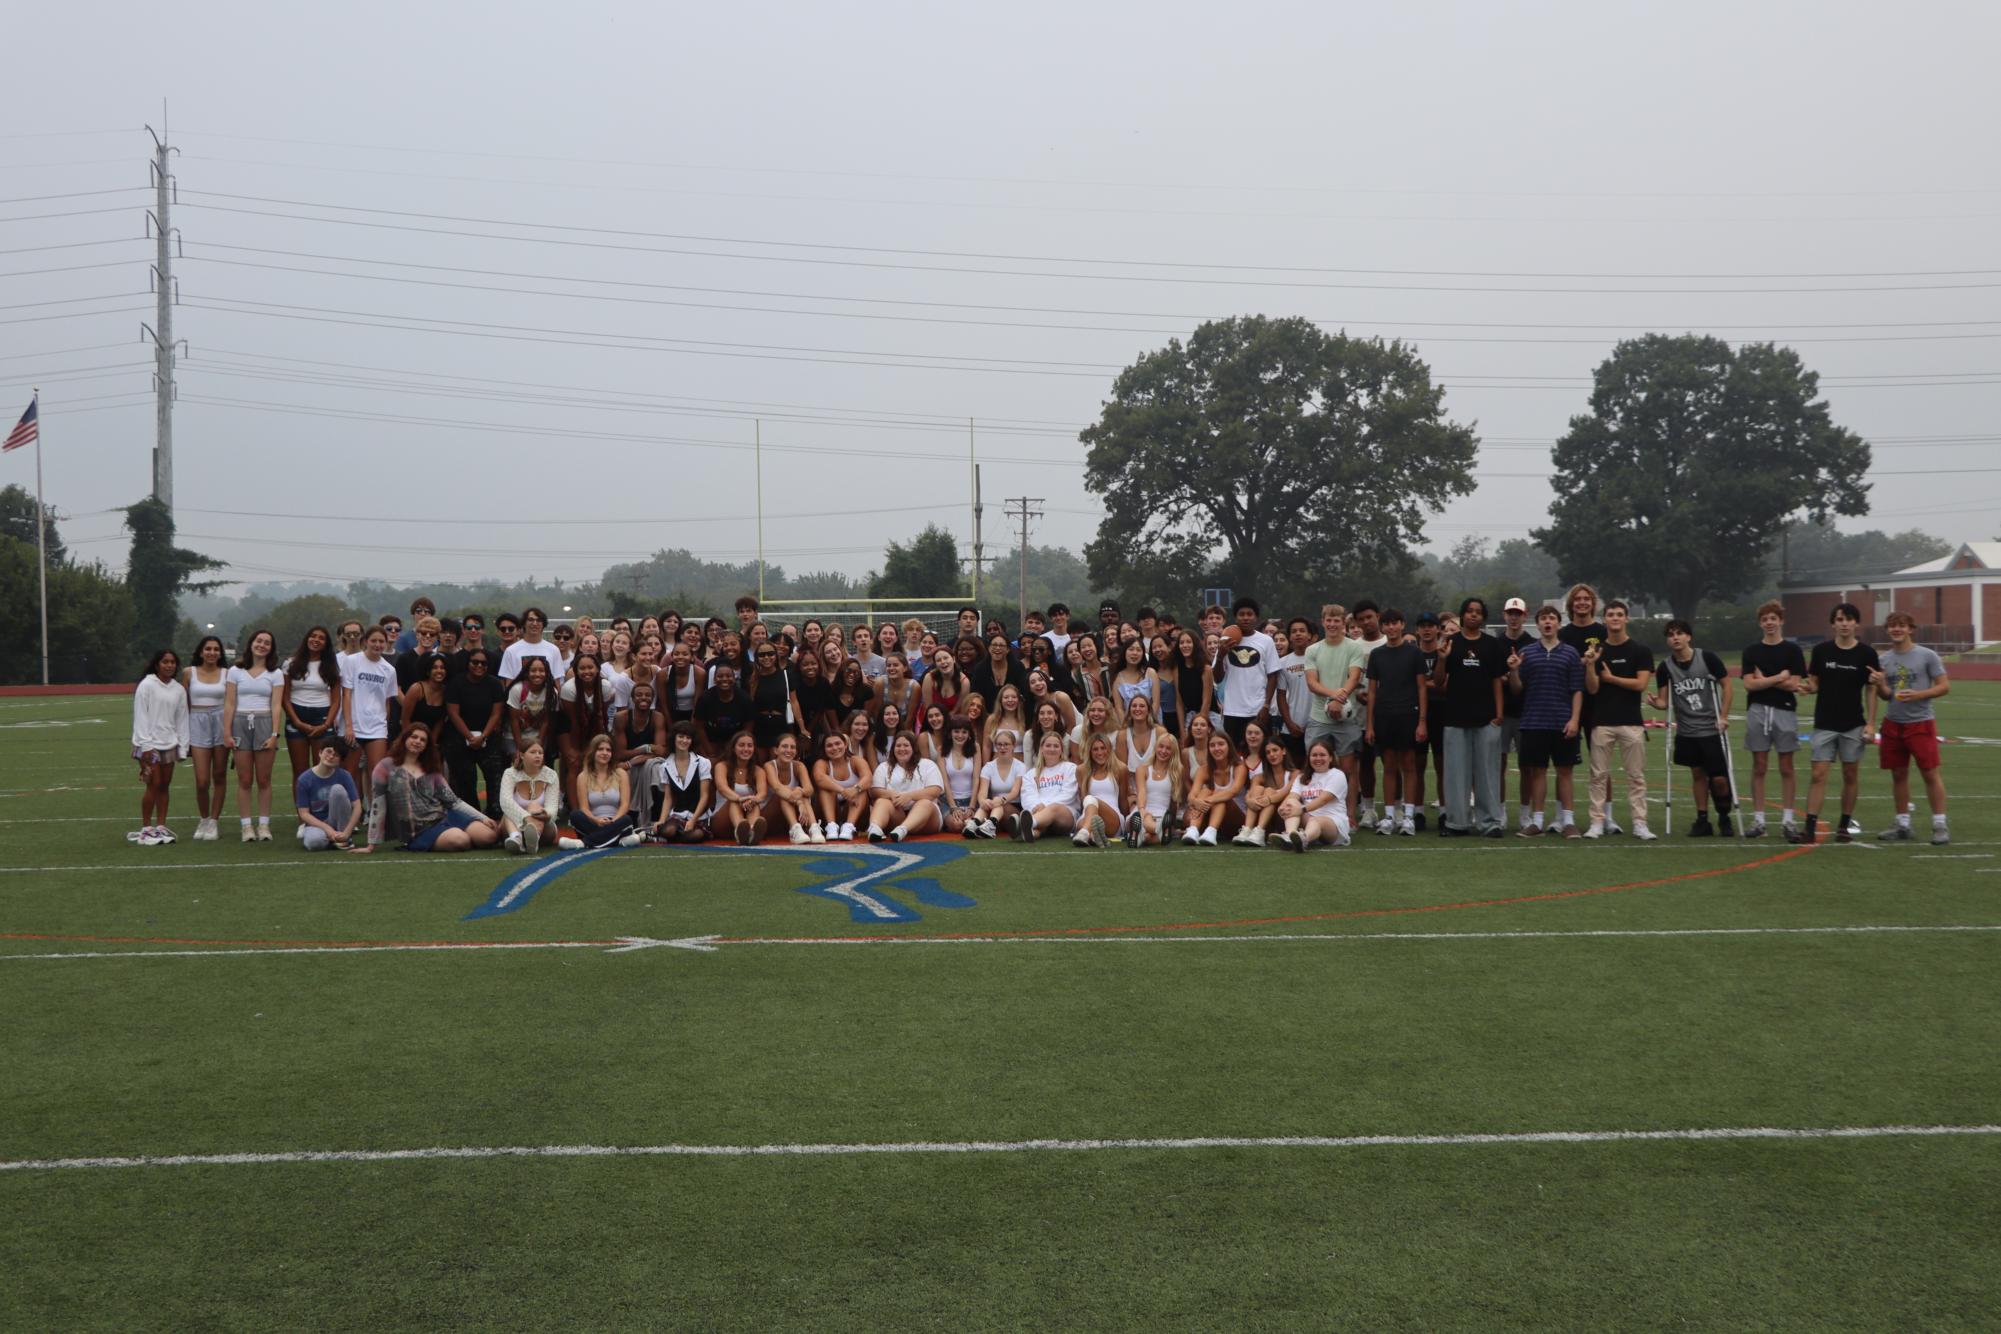 The class of 2024. Gathering two hours before the bell, seniors reunited with friends on Gay Field, Monday, Aug. 21, starting the last first day. The heat index reached 117 degrees, and the sky was obscured by fog. Senior Bora Saner said. “I am both so excited and nervous about leaving school. I am sad about parting ways with my friends.”